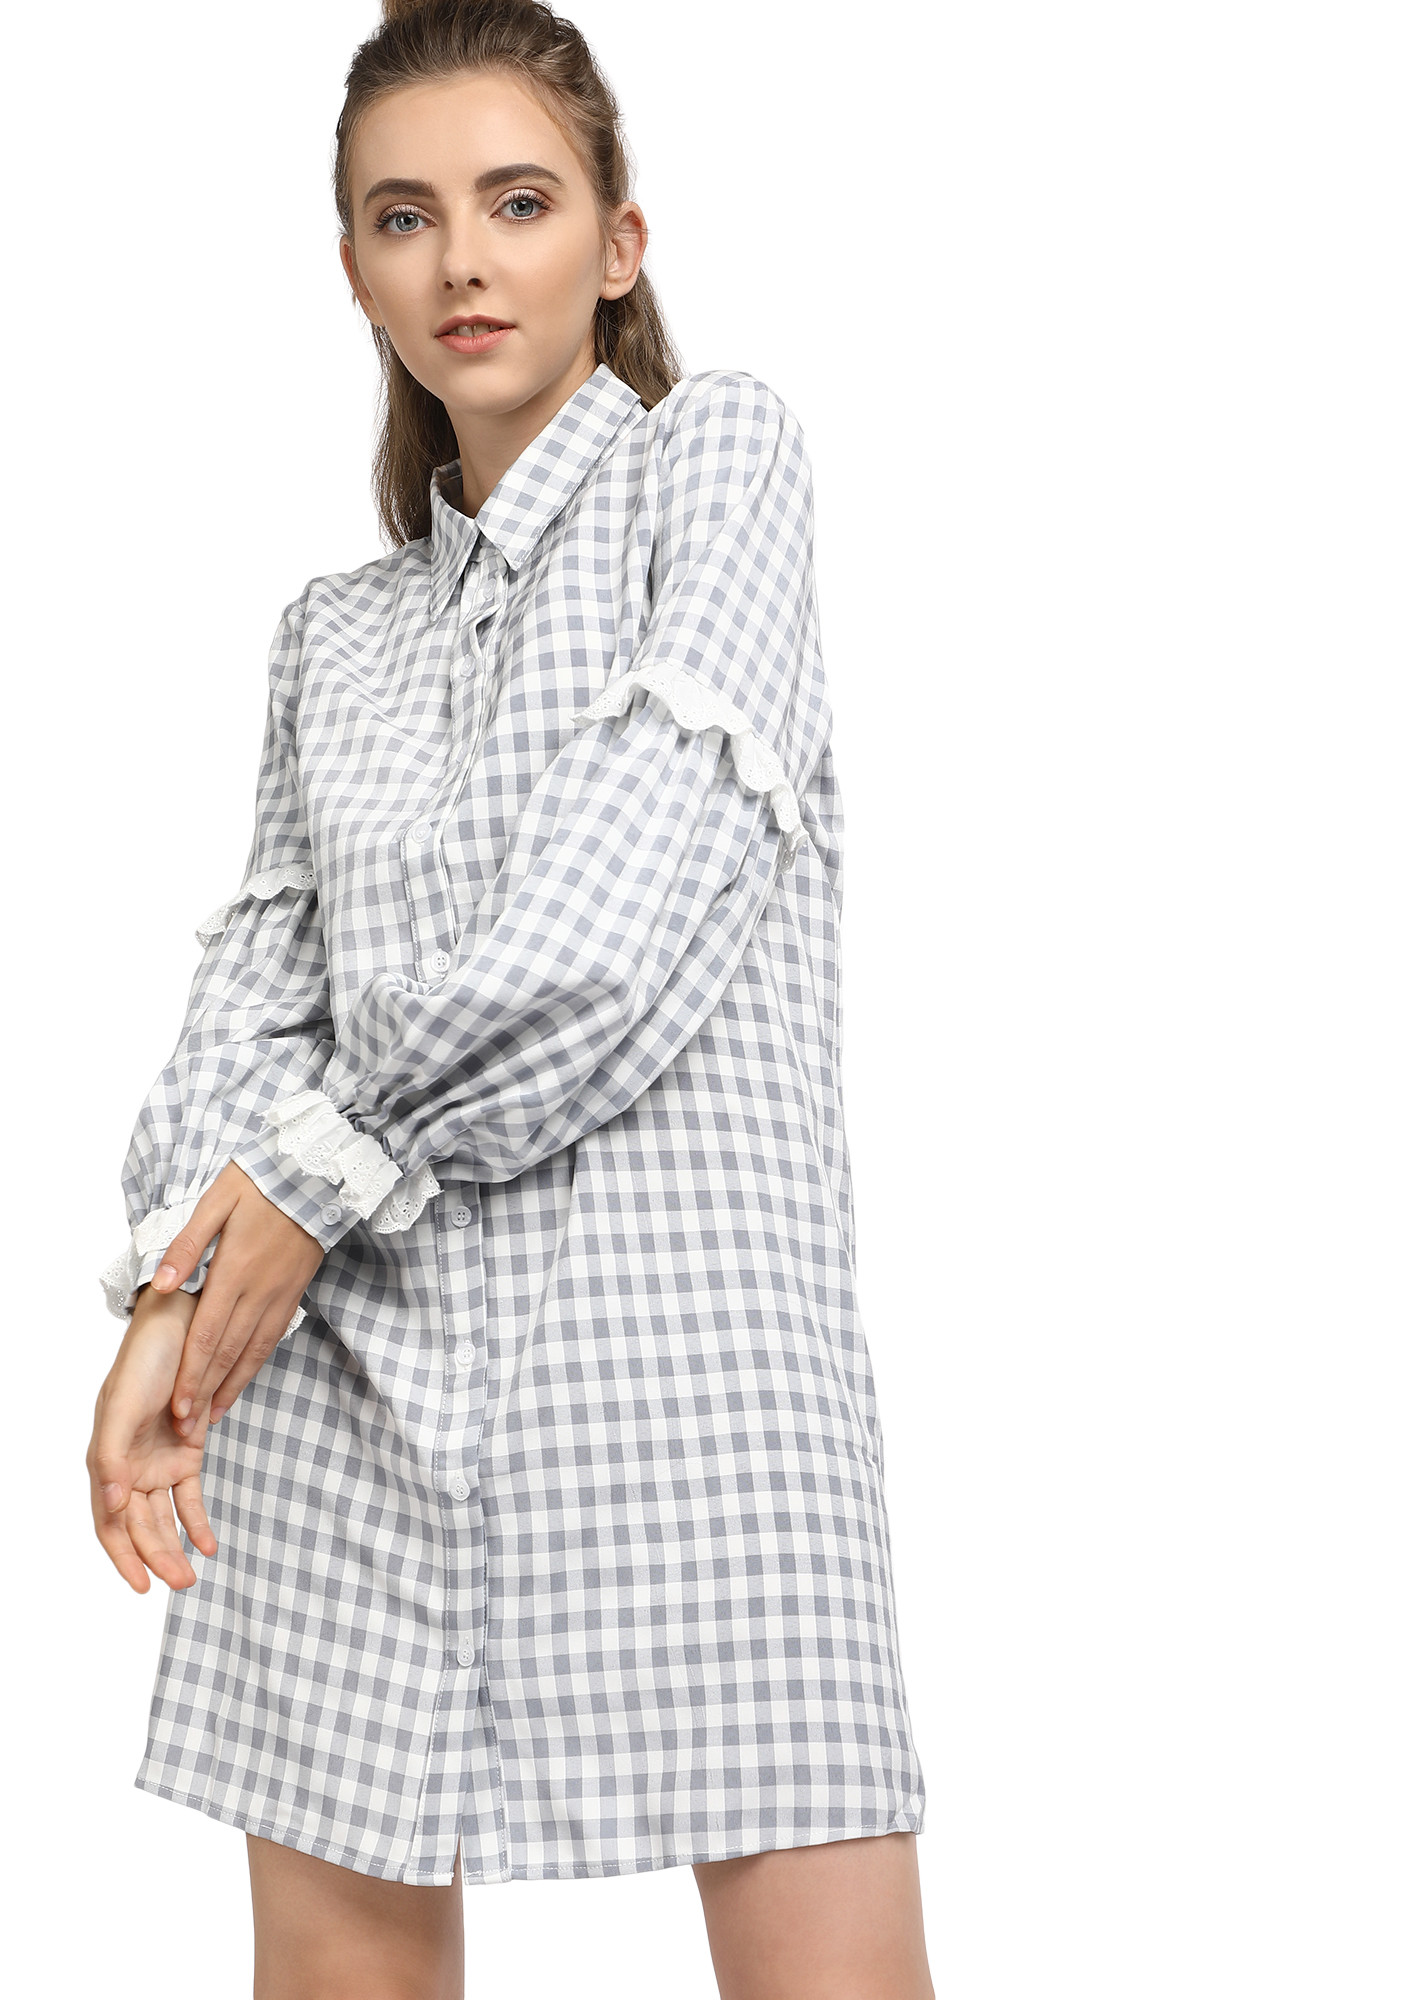 BUTTON OR NOTHING GREY SHIRT DRESS